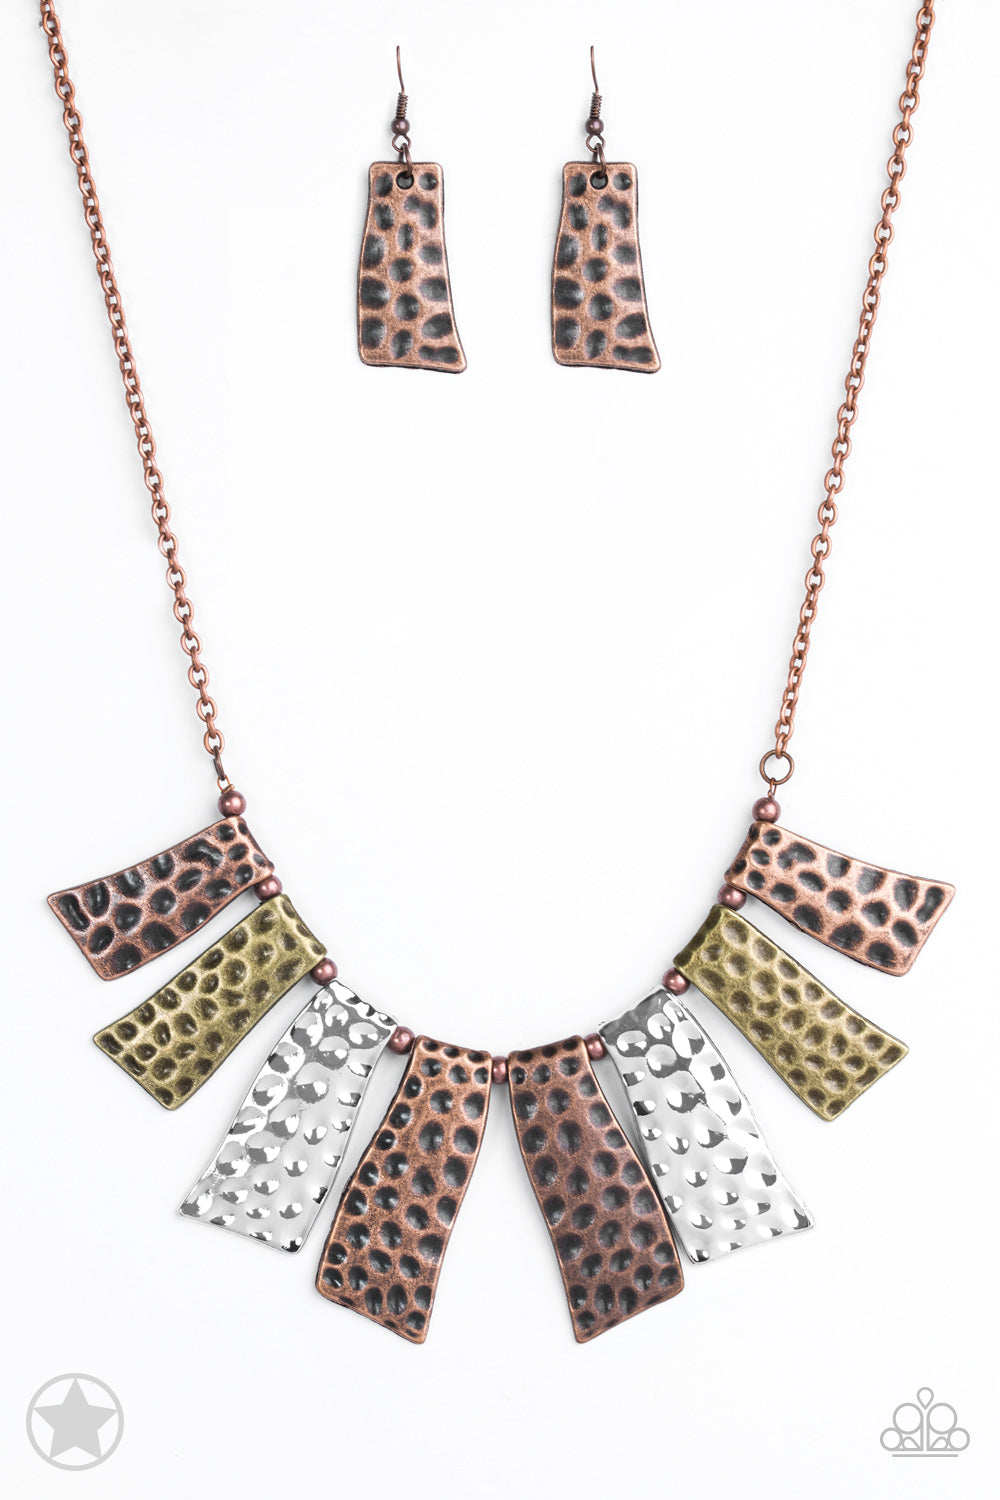 Paparazzi Necklace Blockbuster - A Fan of the Tribe - Copper